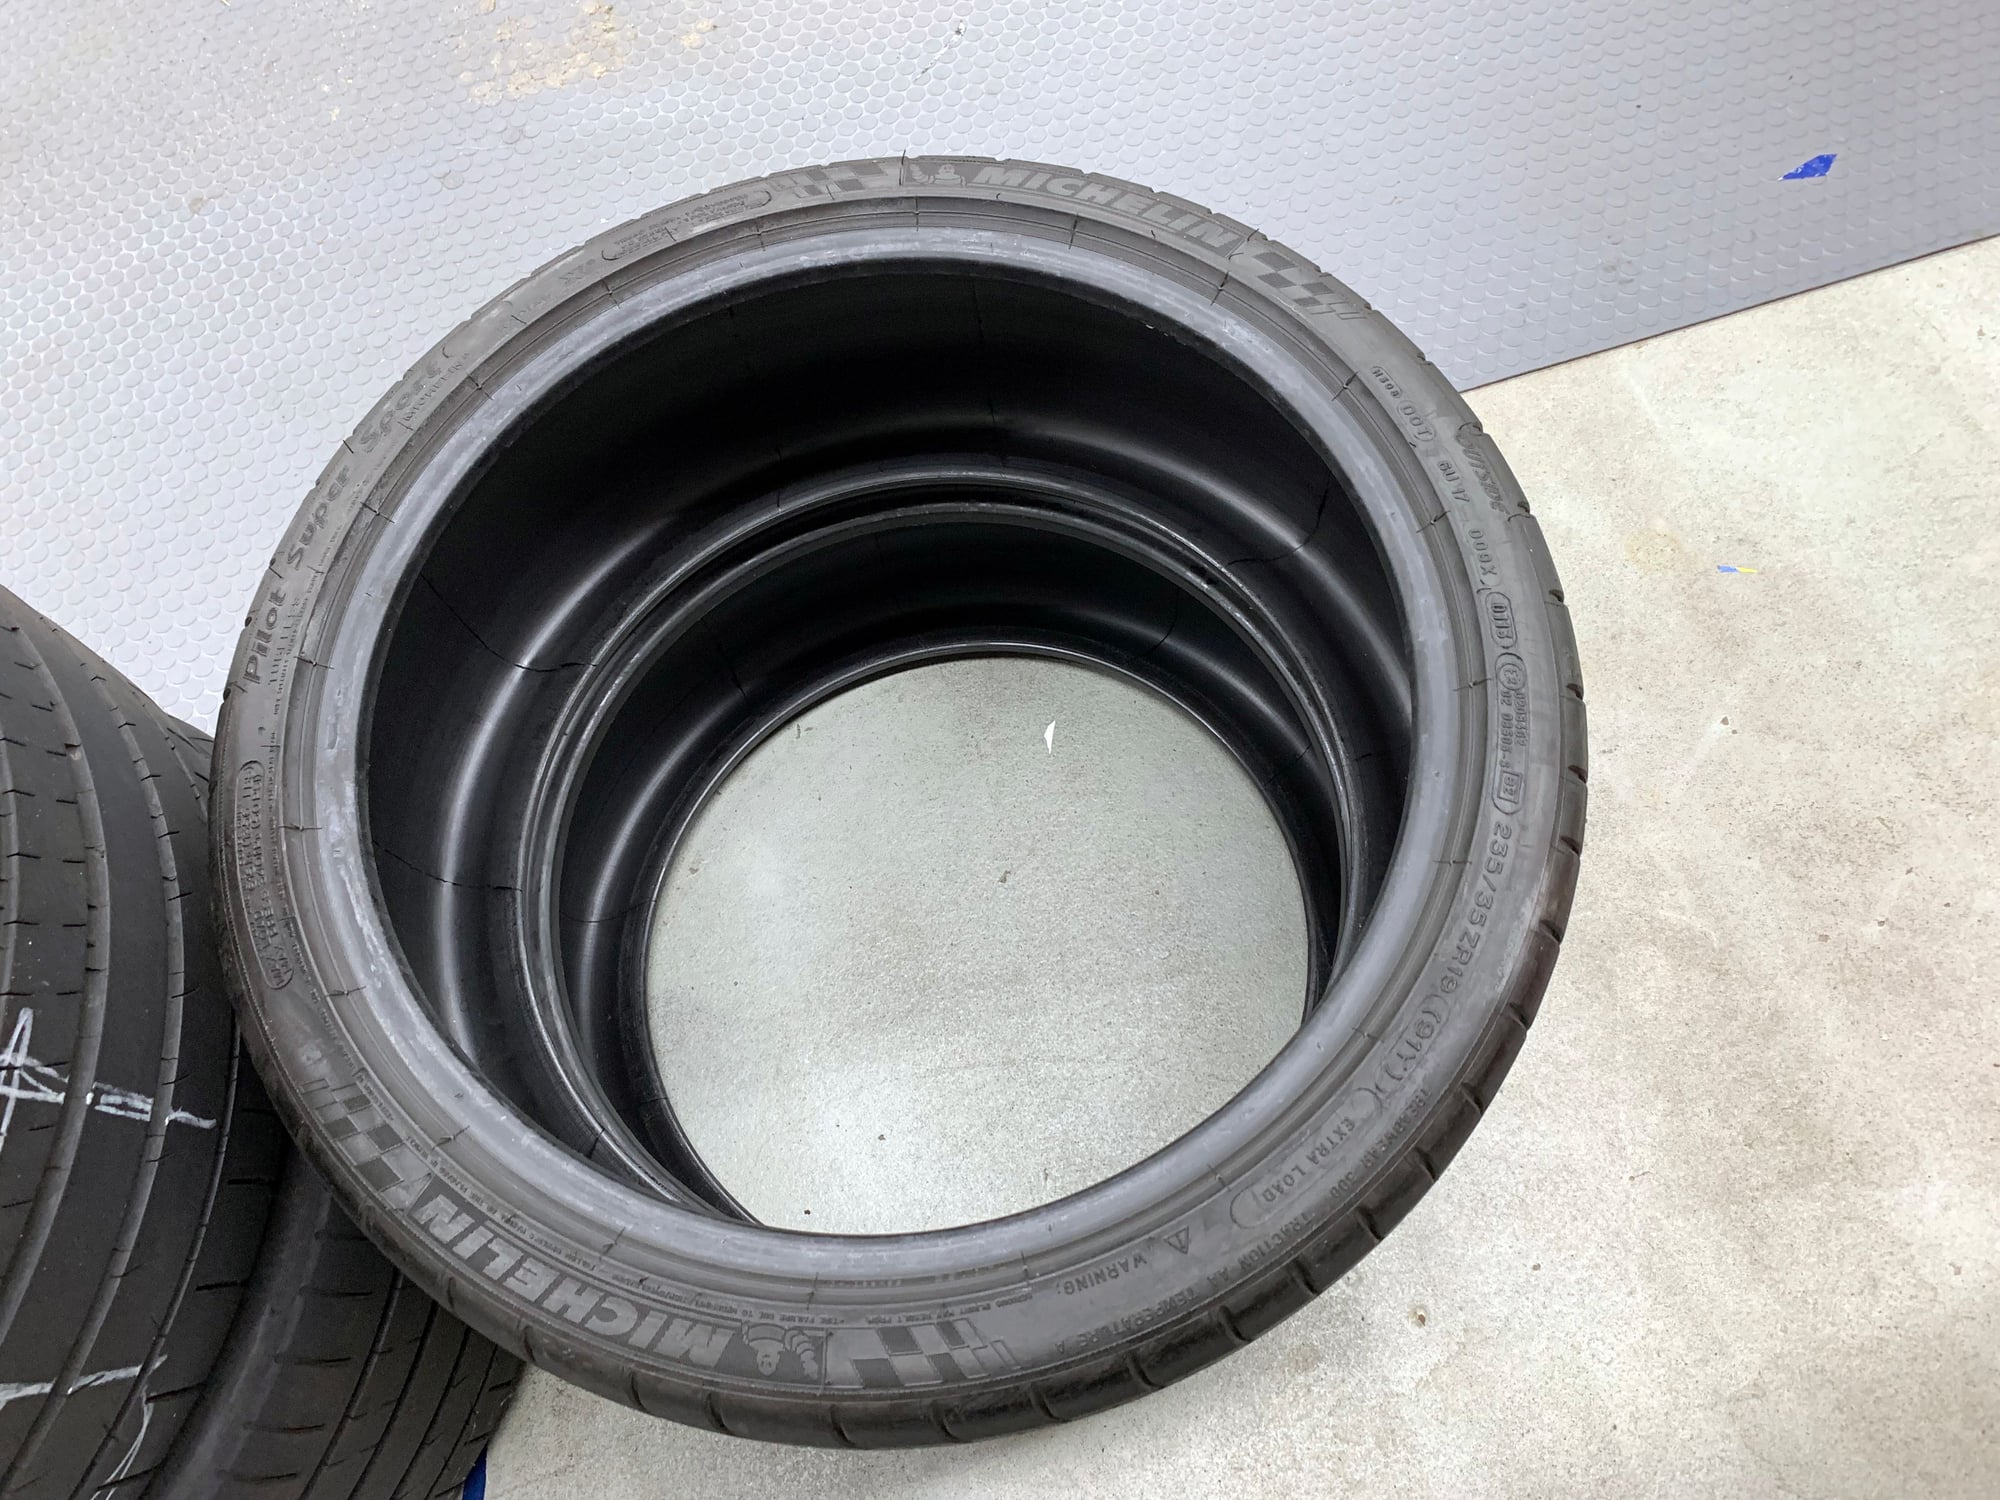 Wheels and Tires/Axles - Set of Michelin Pilot Super Sport Tires for Sale - Used - 1996 to 2021 Any Make All Models - Fairfield, NJ 07004, United States